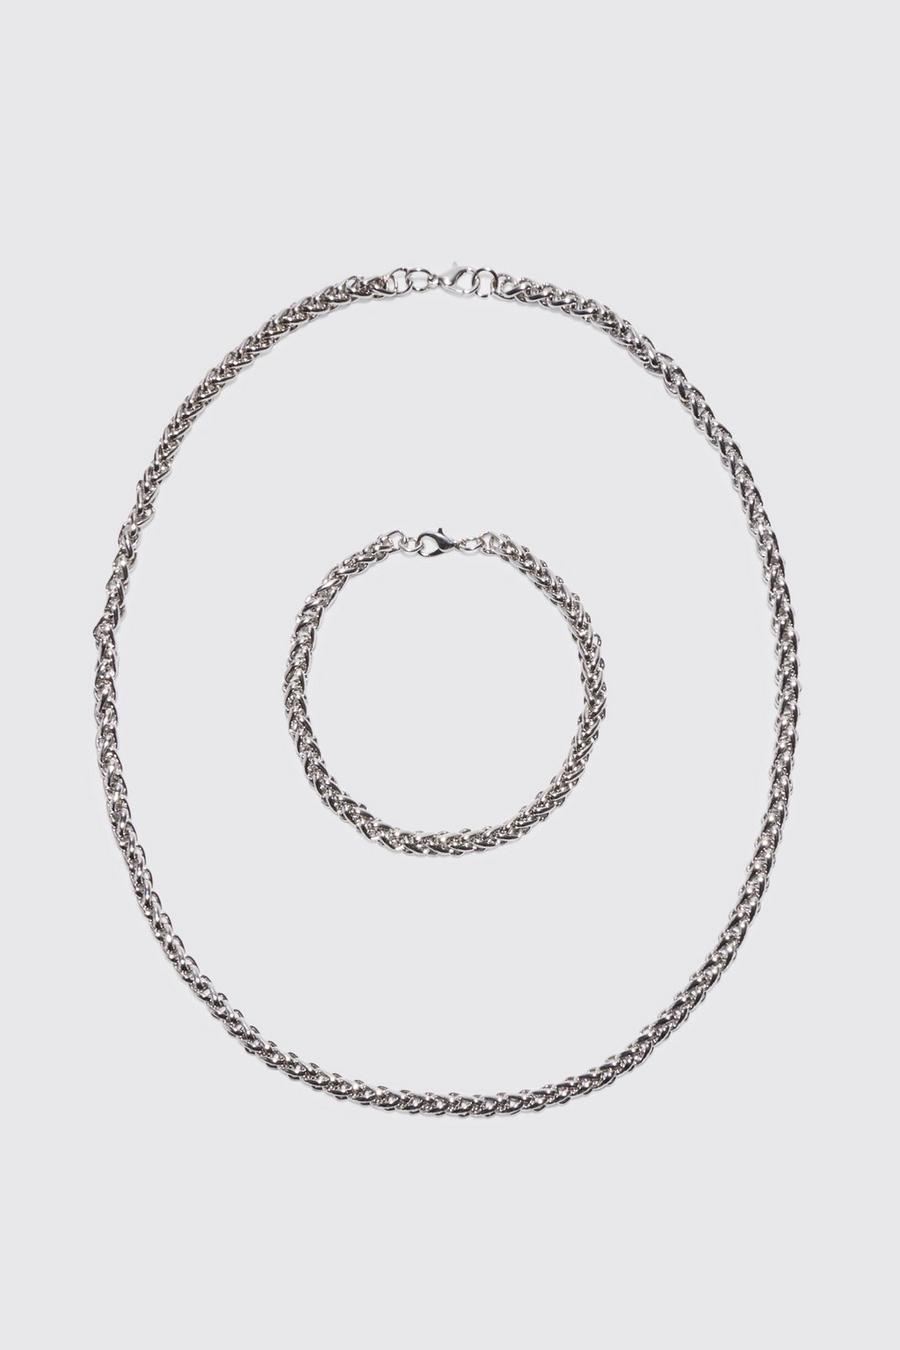 Silver Rope Chain Necklace And Bracelet Set